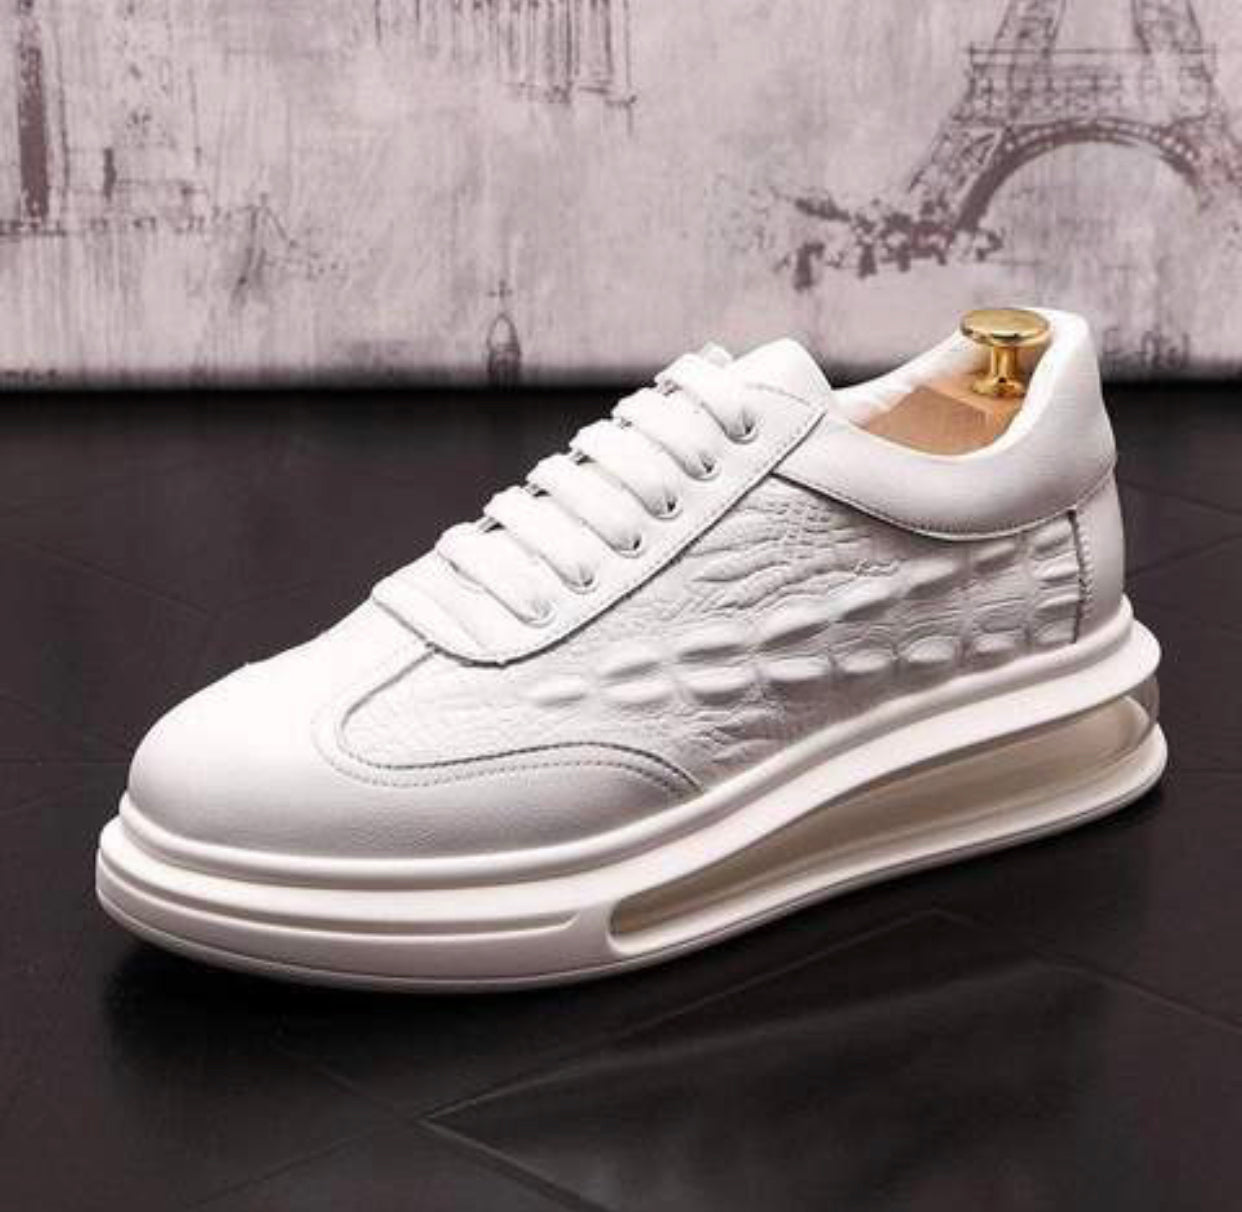 Capos Lace-up Sneakers Shoes